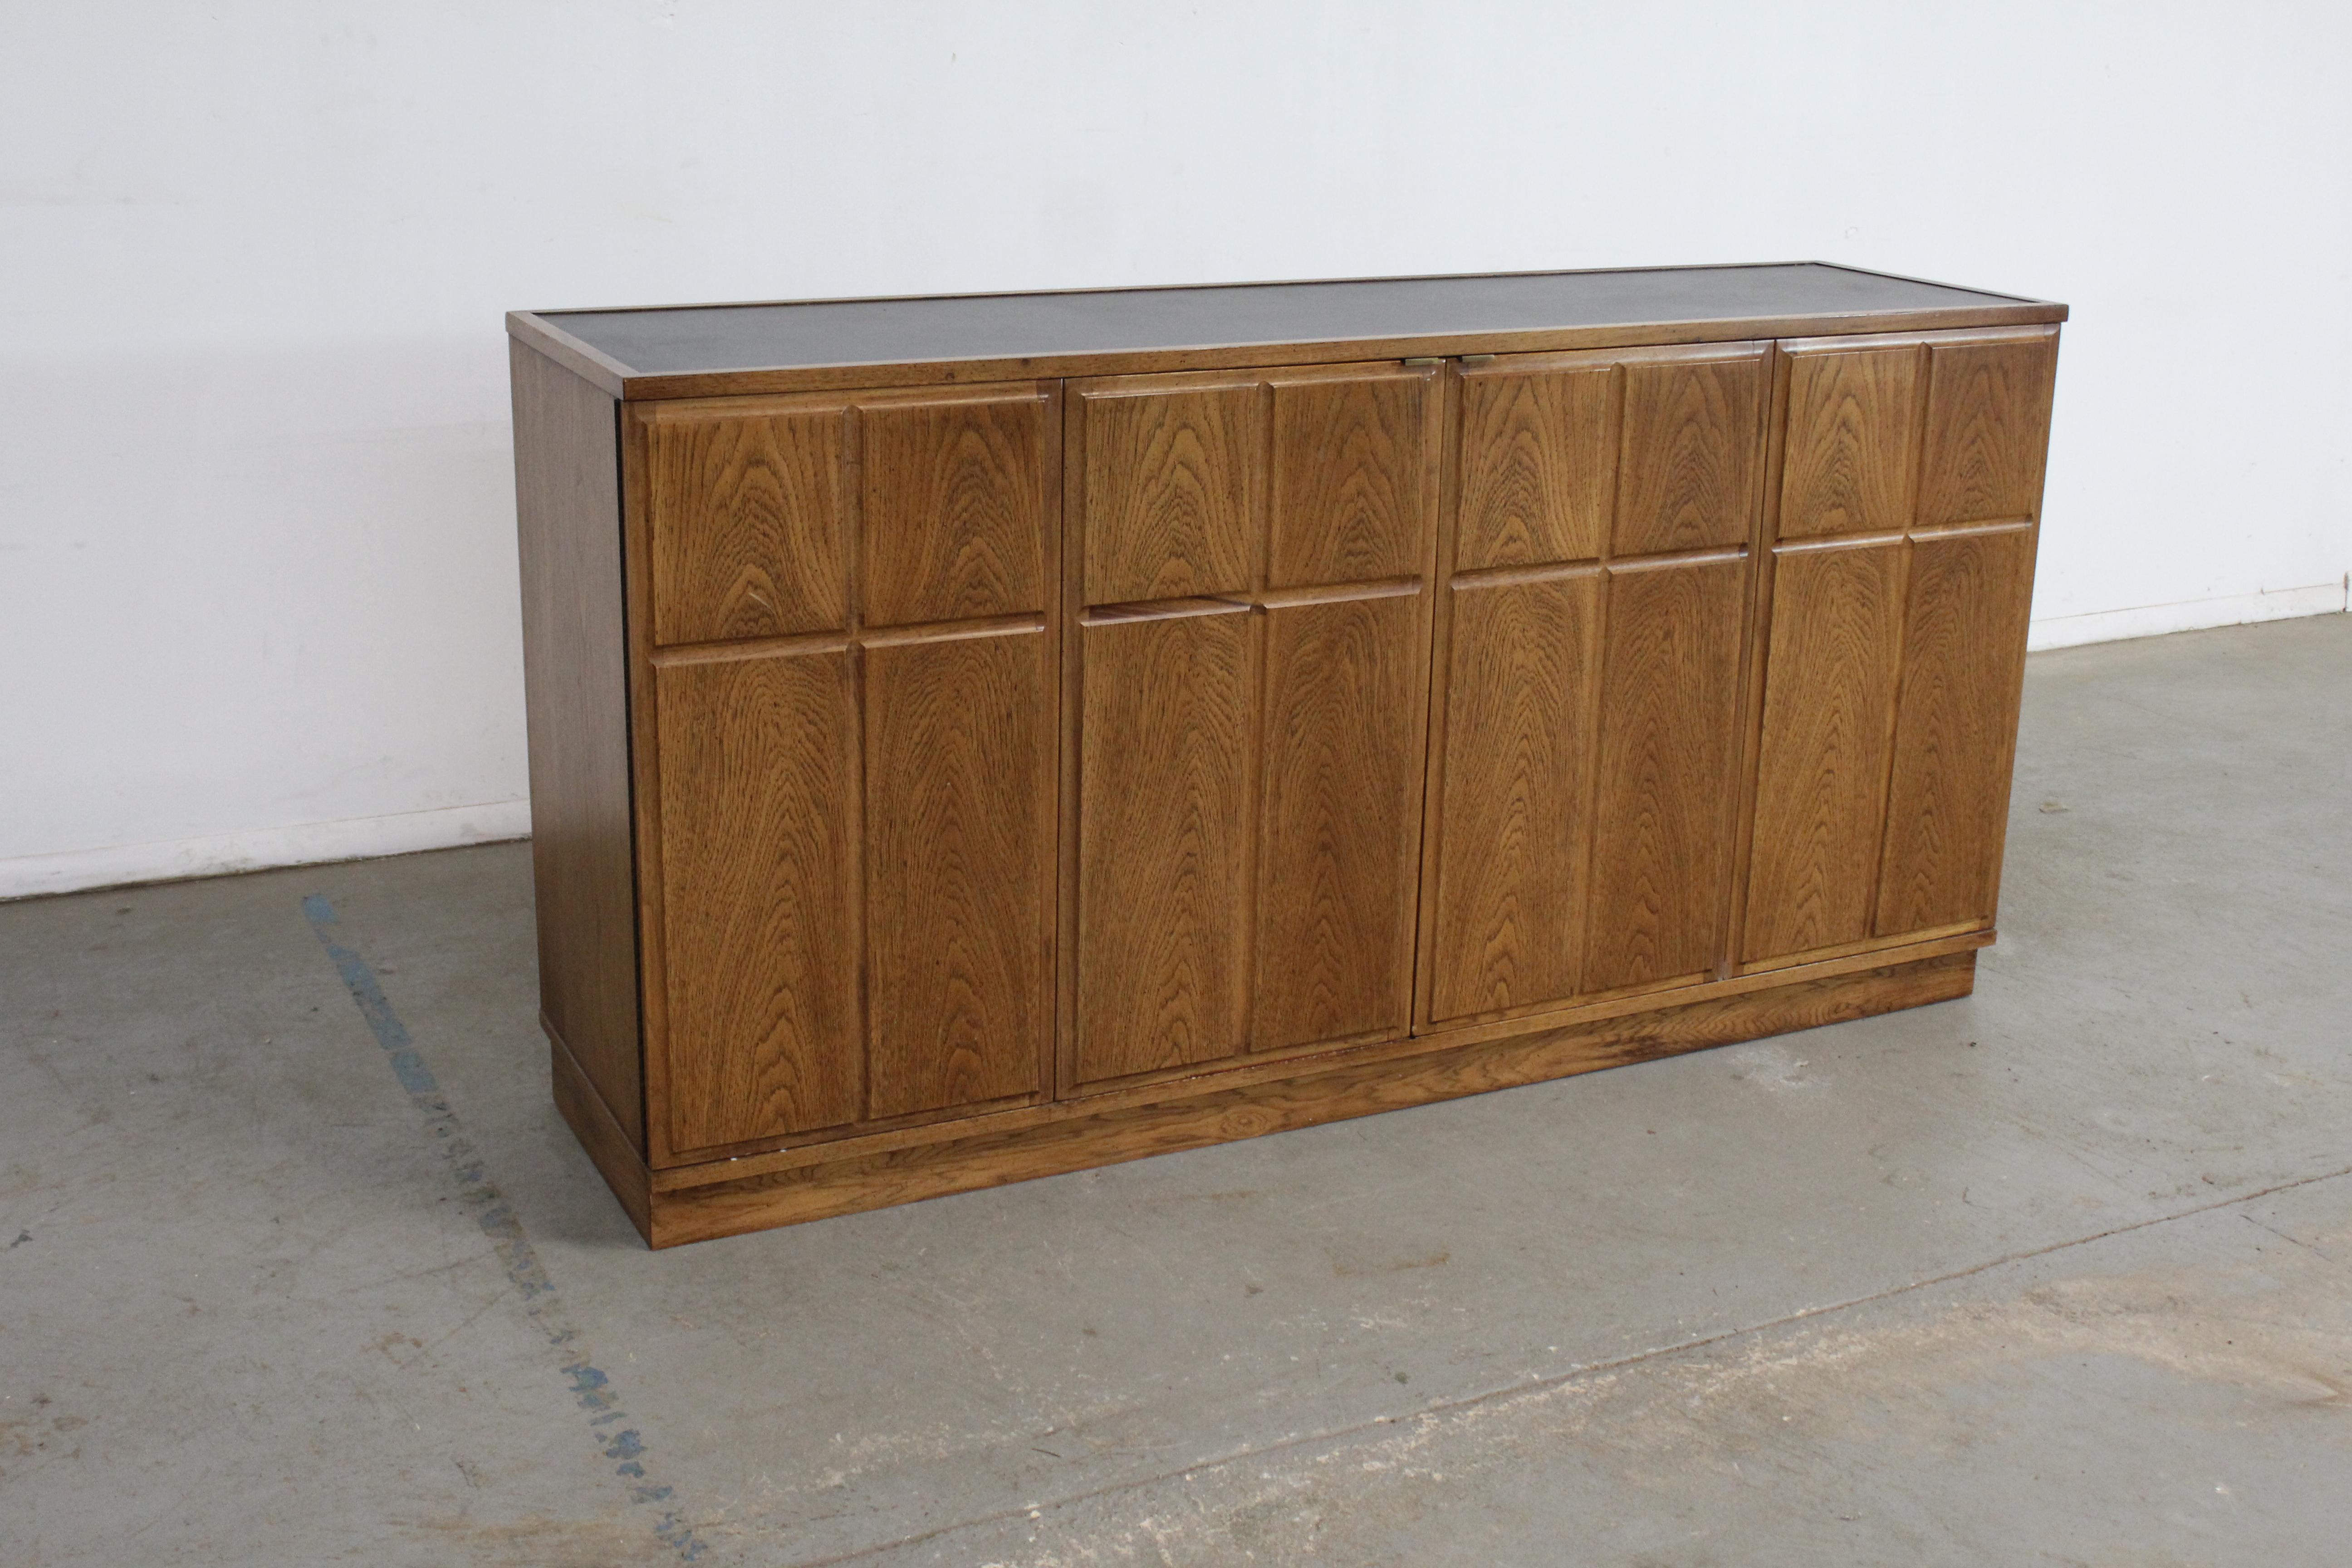 Mid-Century Modern 2 door credenza/sideboard by Founders


Offered is a beautiful Mid-Century Modern 2 Door Credenza/Sideboard with ample storage space, which was designed by Founders. Features 6 drawers and 2 bifold doors. The top shows great